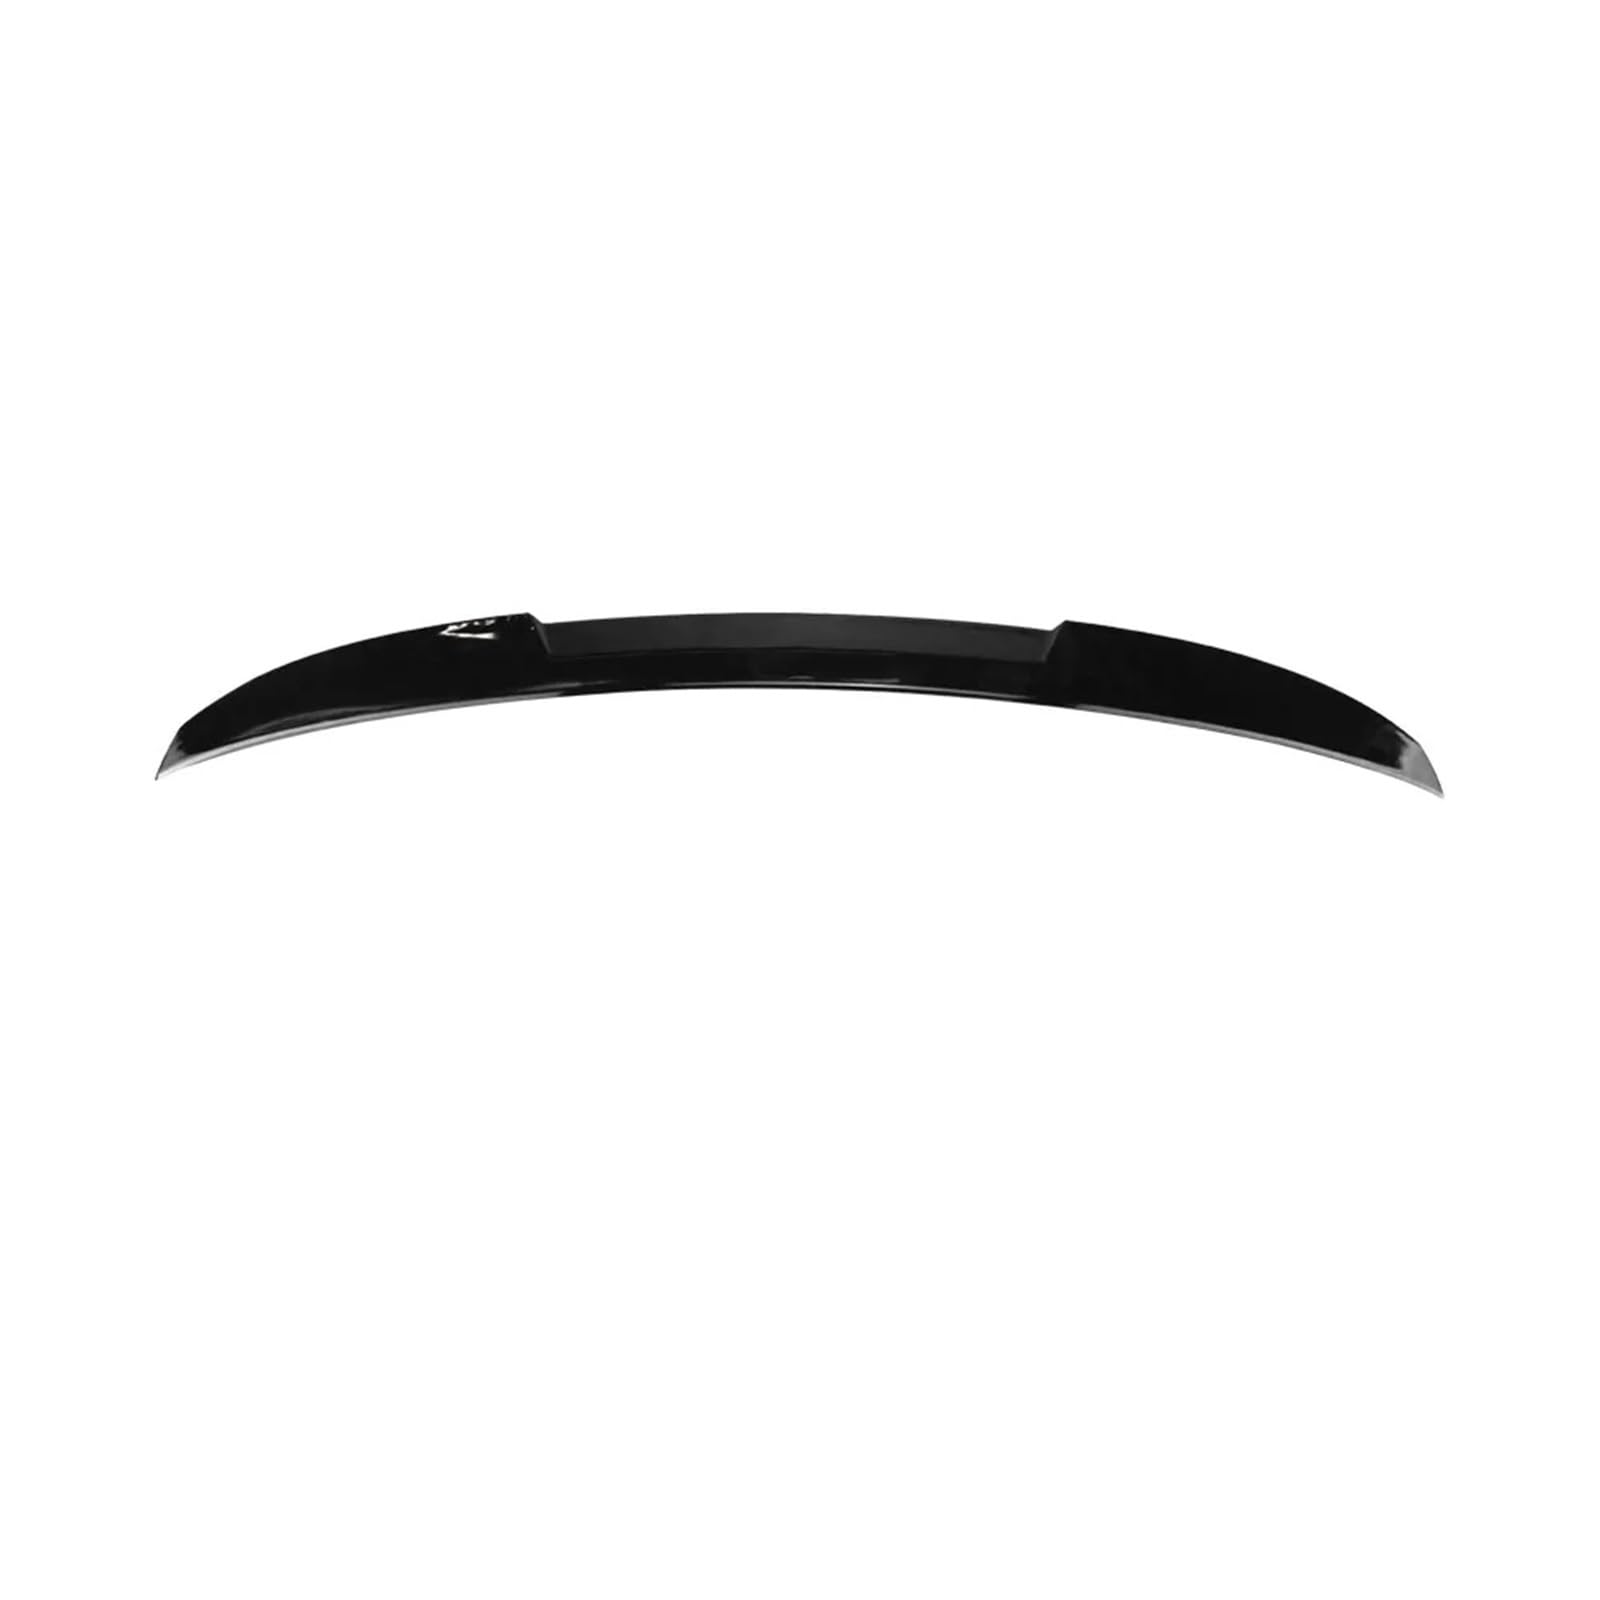 Rear Trunk Lid Spoiler M4 Blade Shape Tail Wing Body Kit Accessories Compatible for BMW 5 Series G30 2018-2020(Gloss black) von BRANISLVV